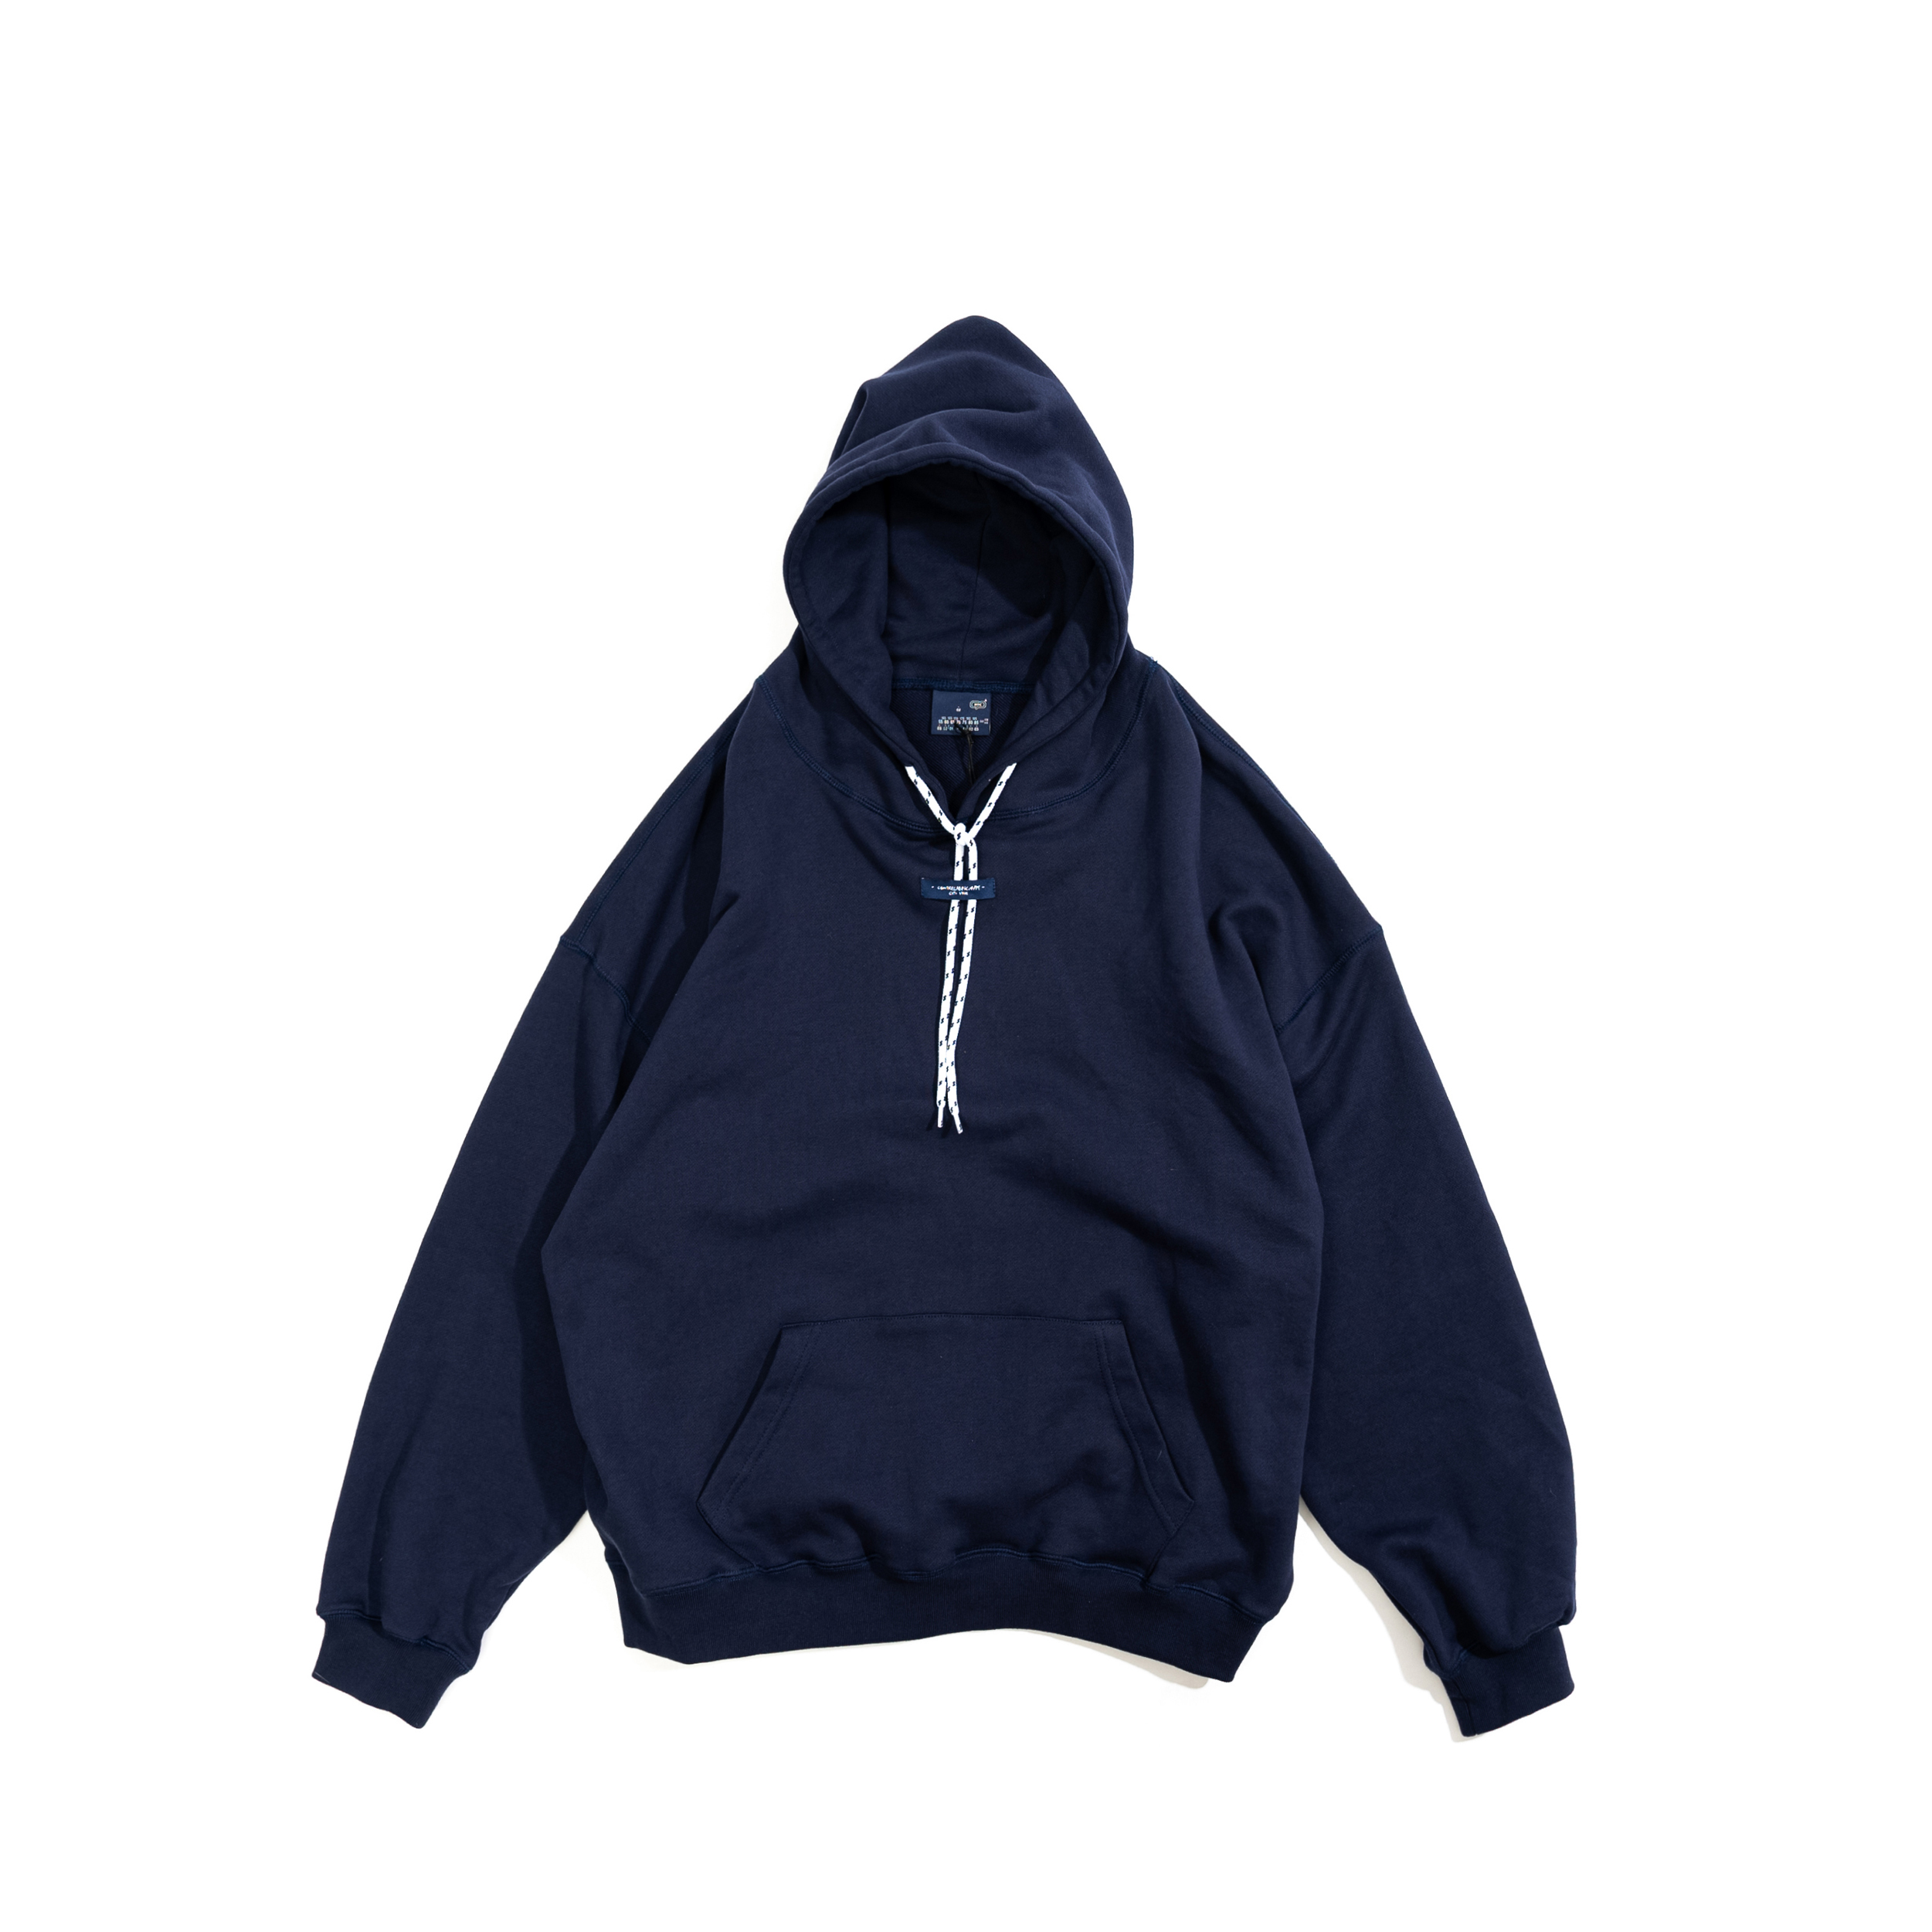 CentralPark.4PM - Wide Sweat Hoodie - 2 Colors